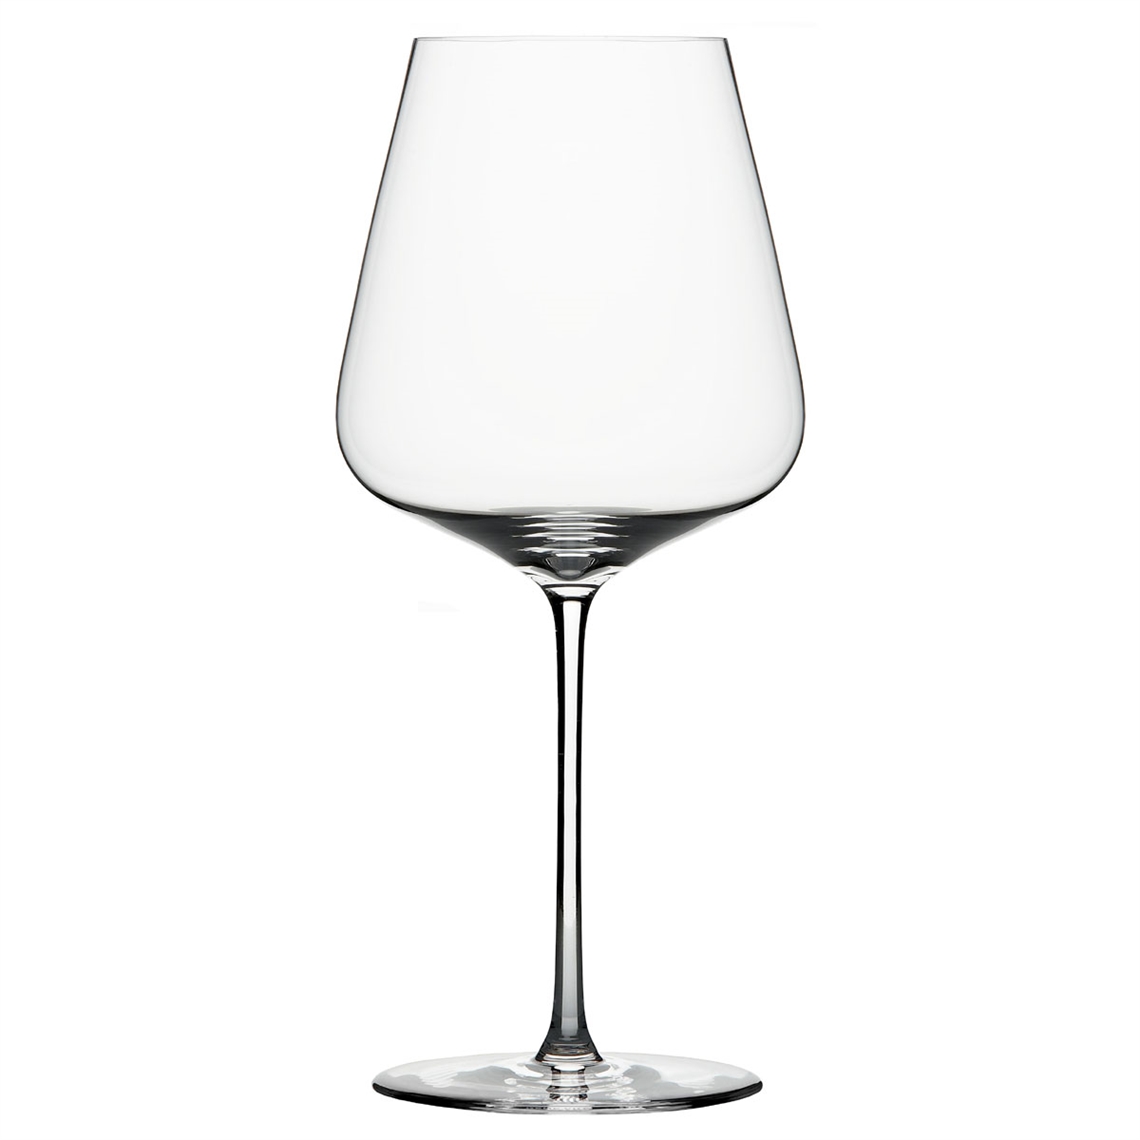 View more how to taste wine - a complete guide  from our Premium Mouth Blown Glassware range